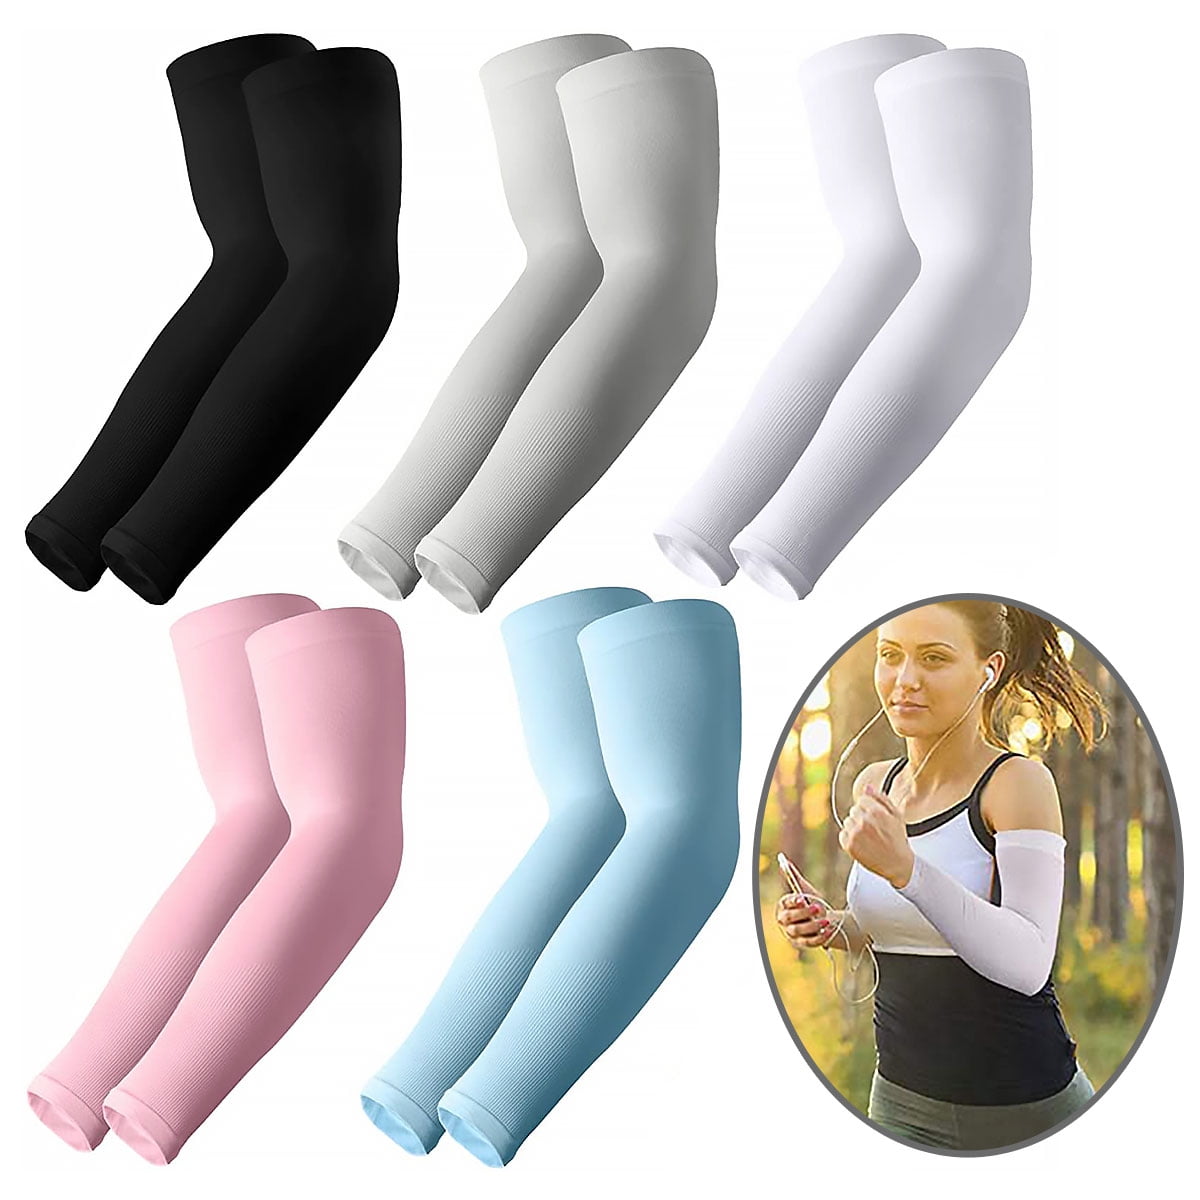 5 Pairs Cooling Arm Sleeves Outdoor Sport Basketball UV Sun Protection Arm Cover 